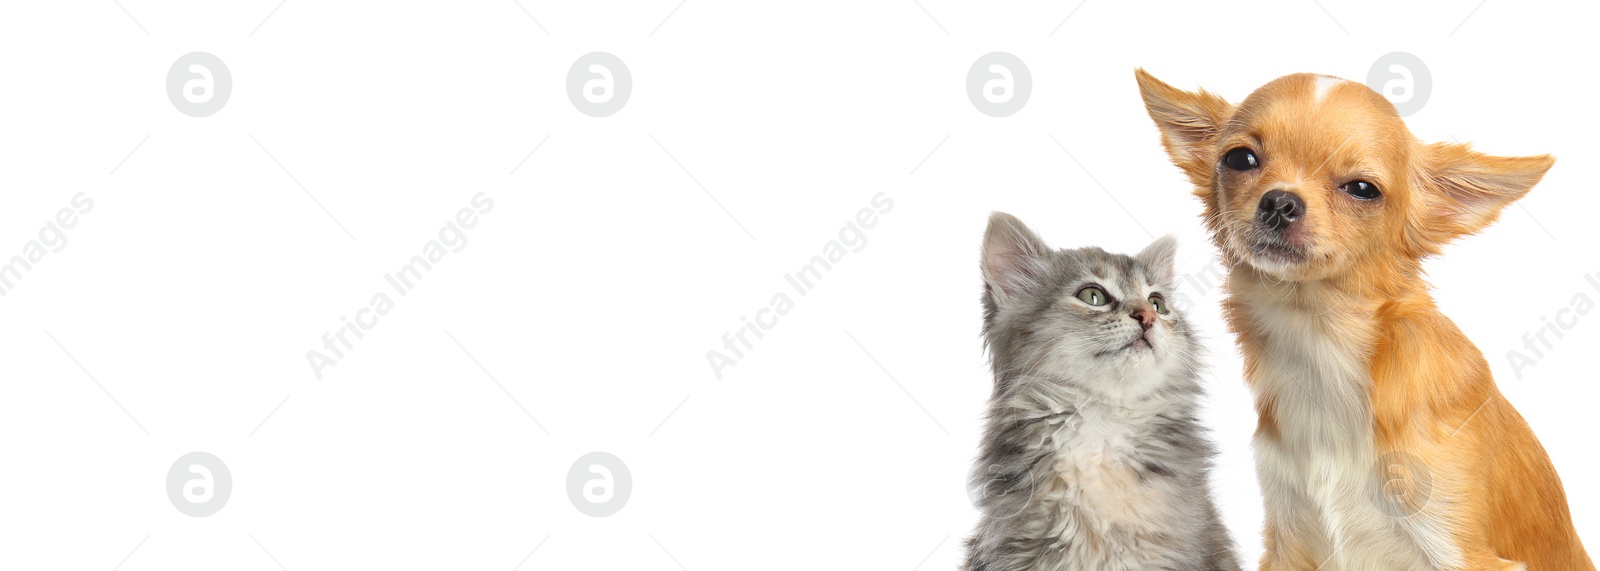 Image of Cute fluffy kitten and small Chihuahua dog on white background. Banner design with space for text